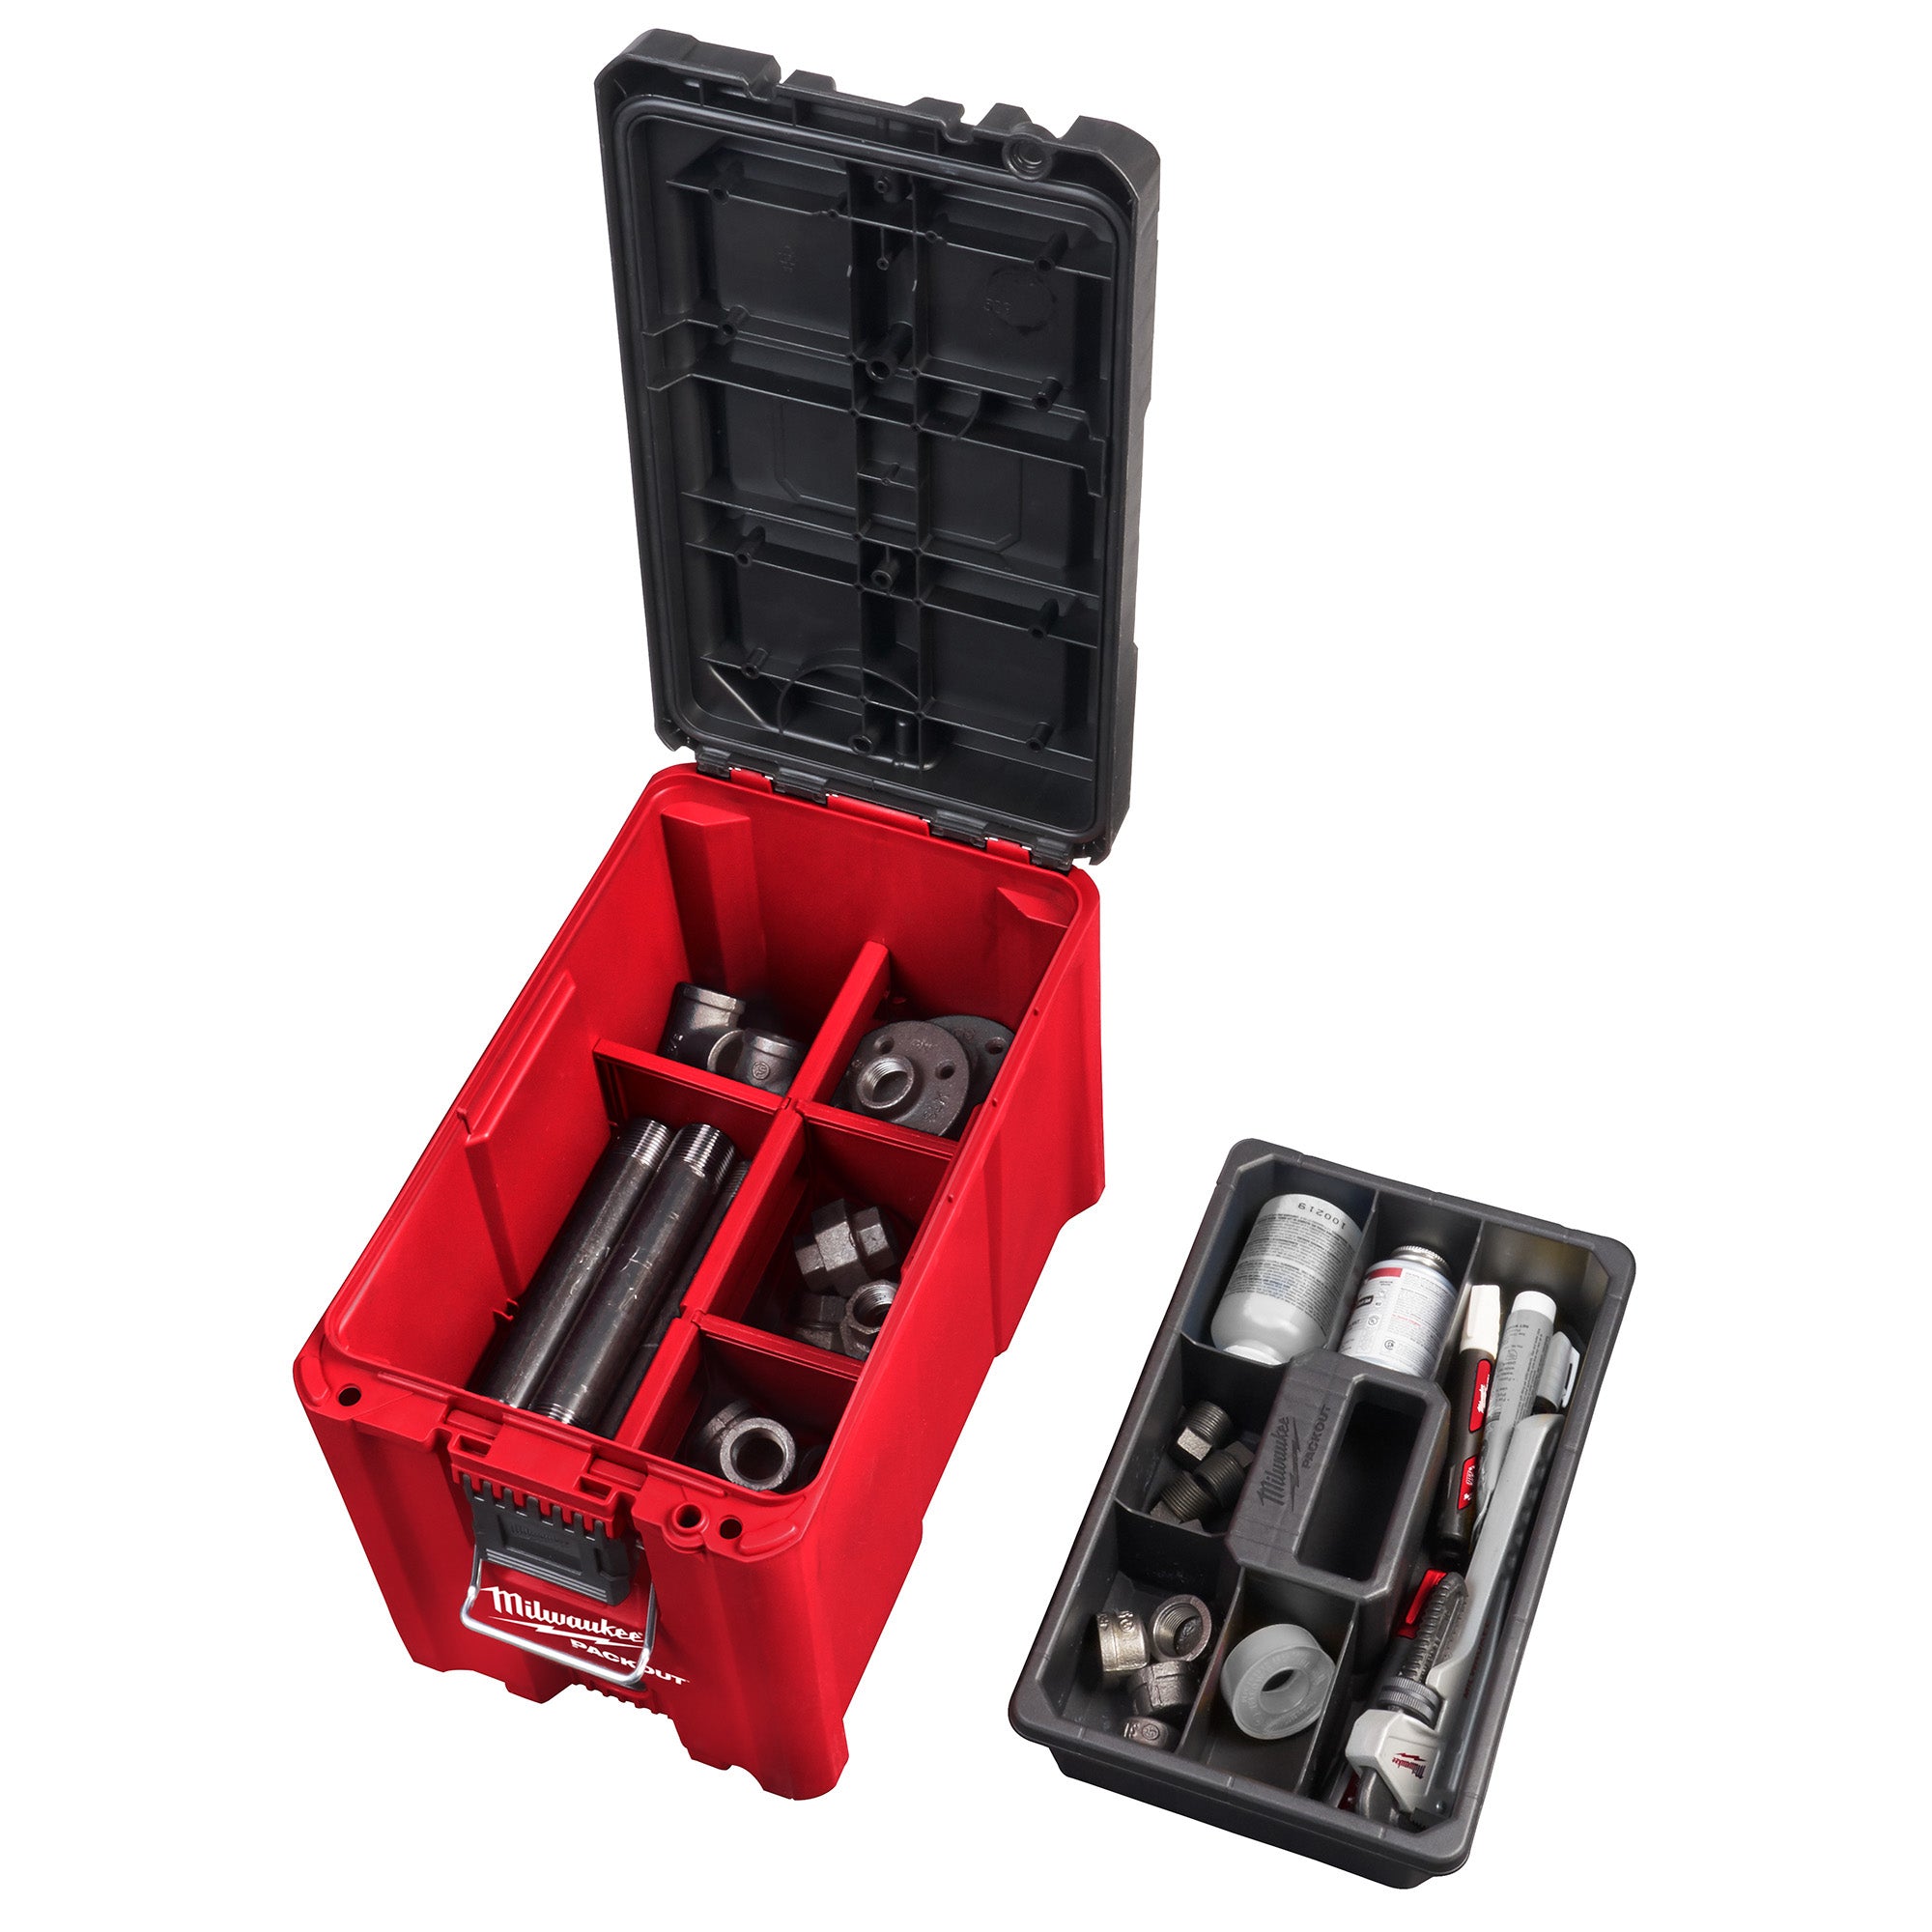 PACKOUT Compact Tool Box